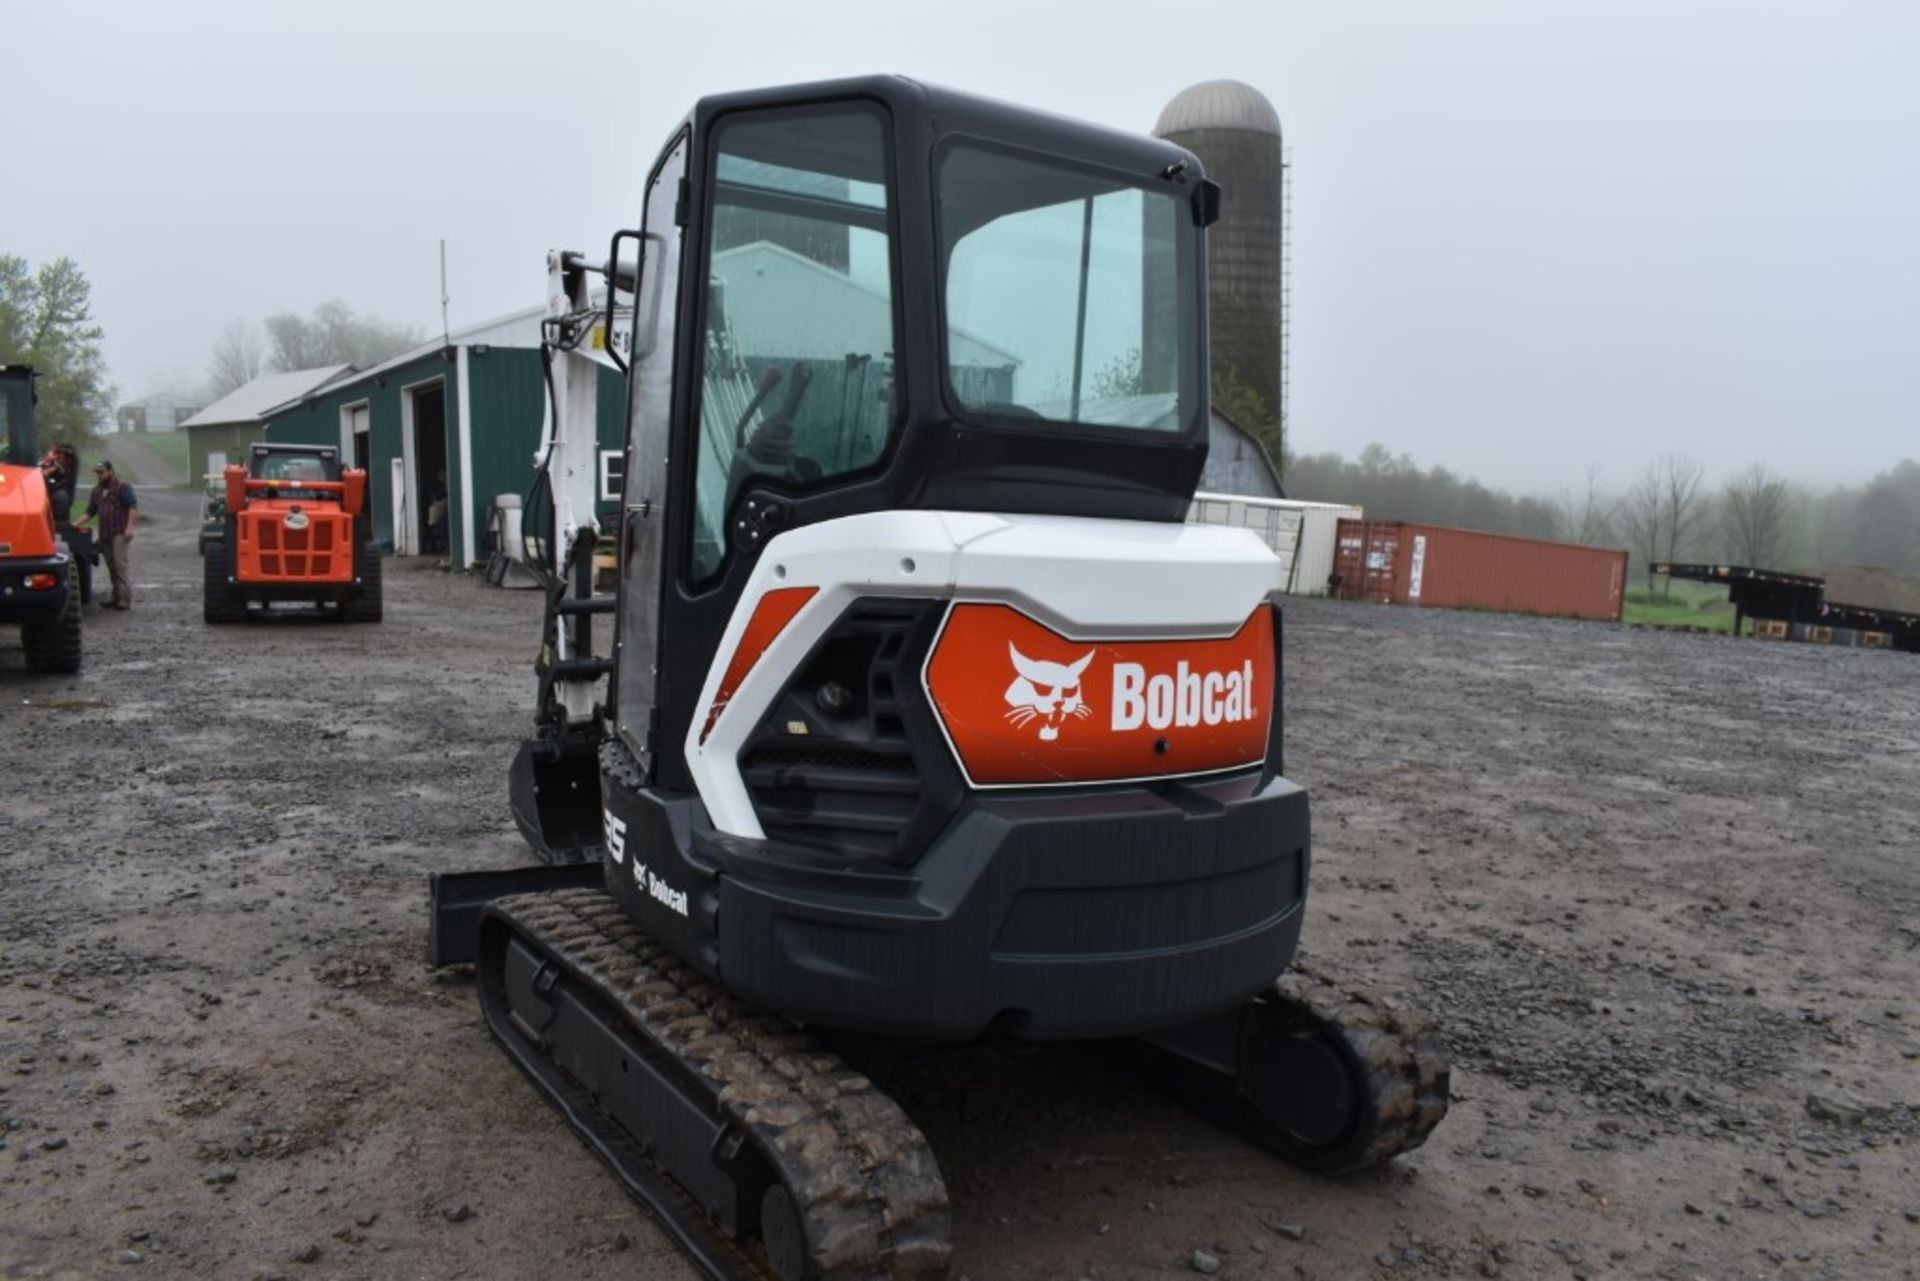 2020 Bobcat E35i Excavator 1006 Hours, Runs and Operates, 18" Bucket, Dual Auxiliary Hydraulics, - Image 15 of 36